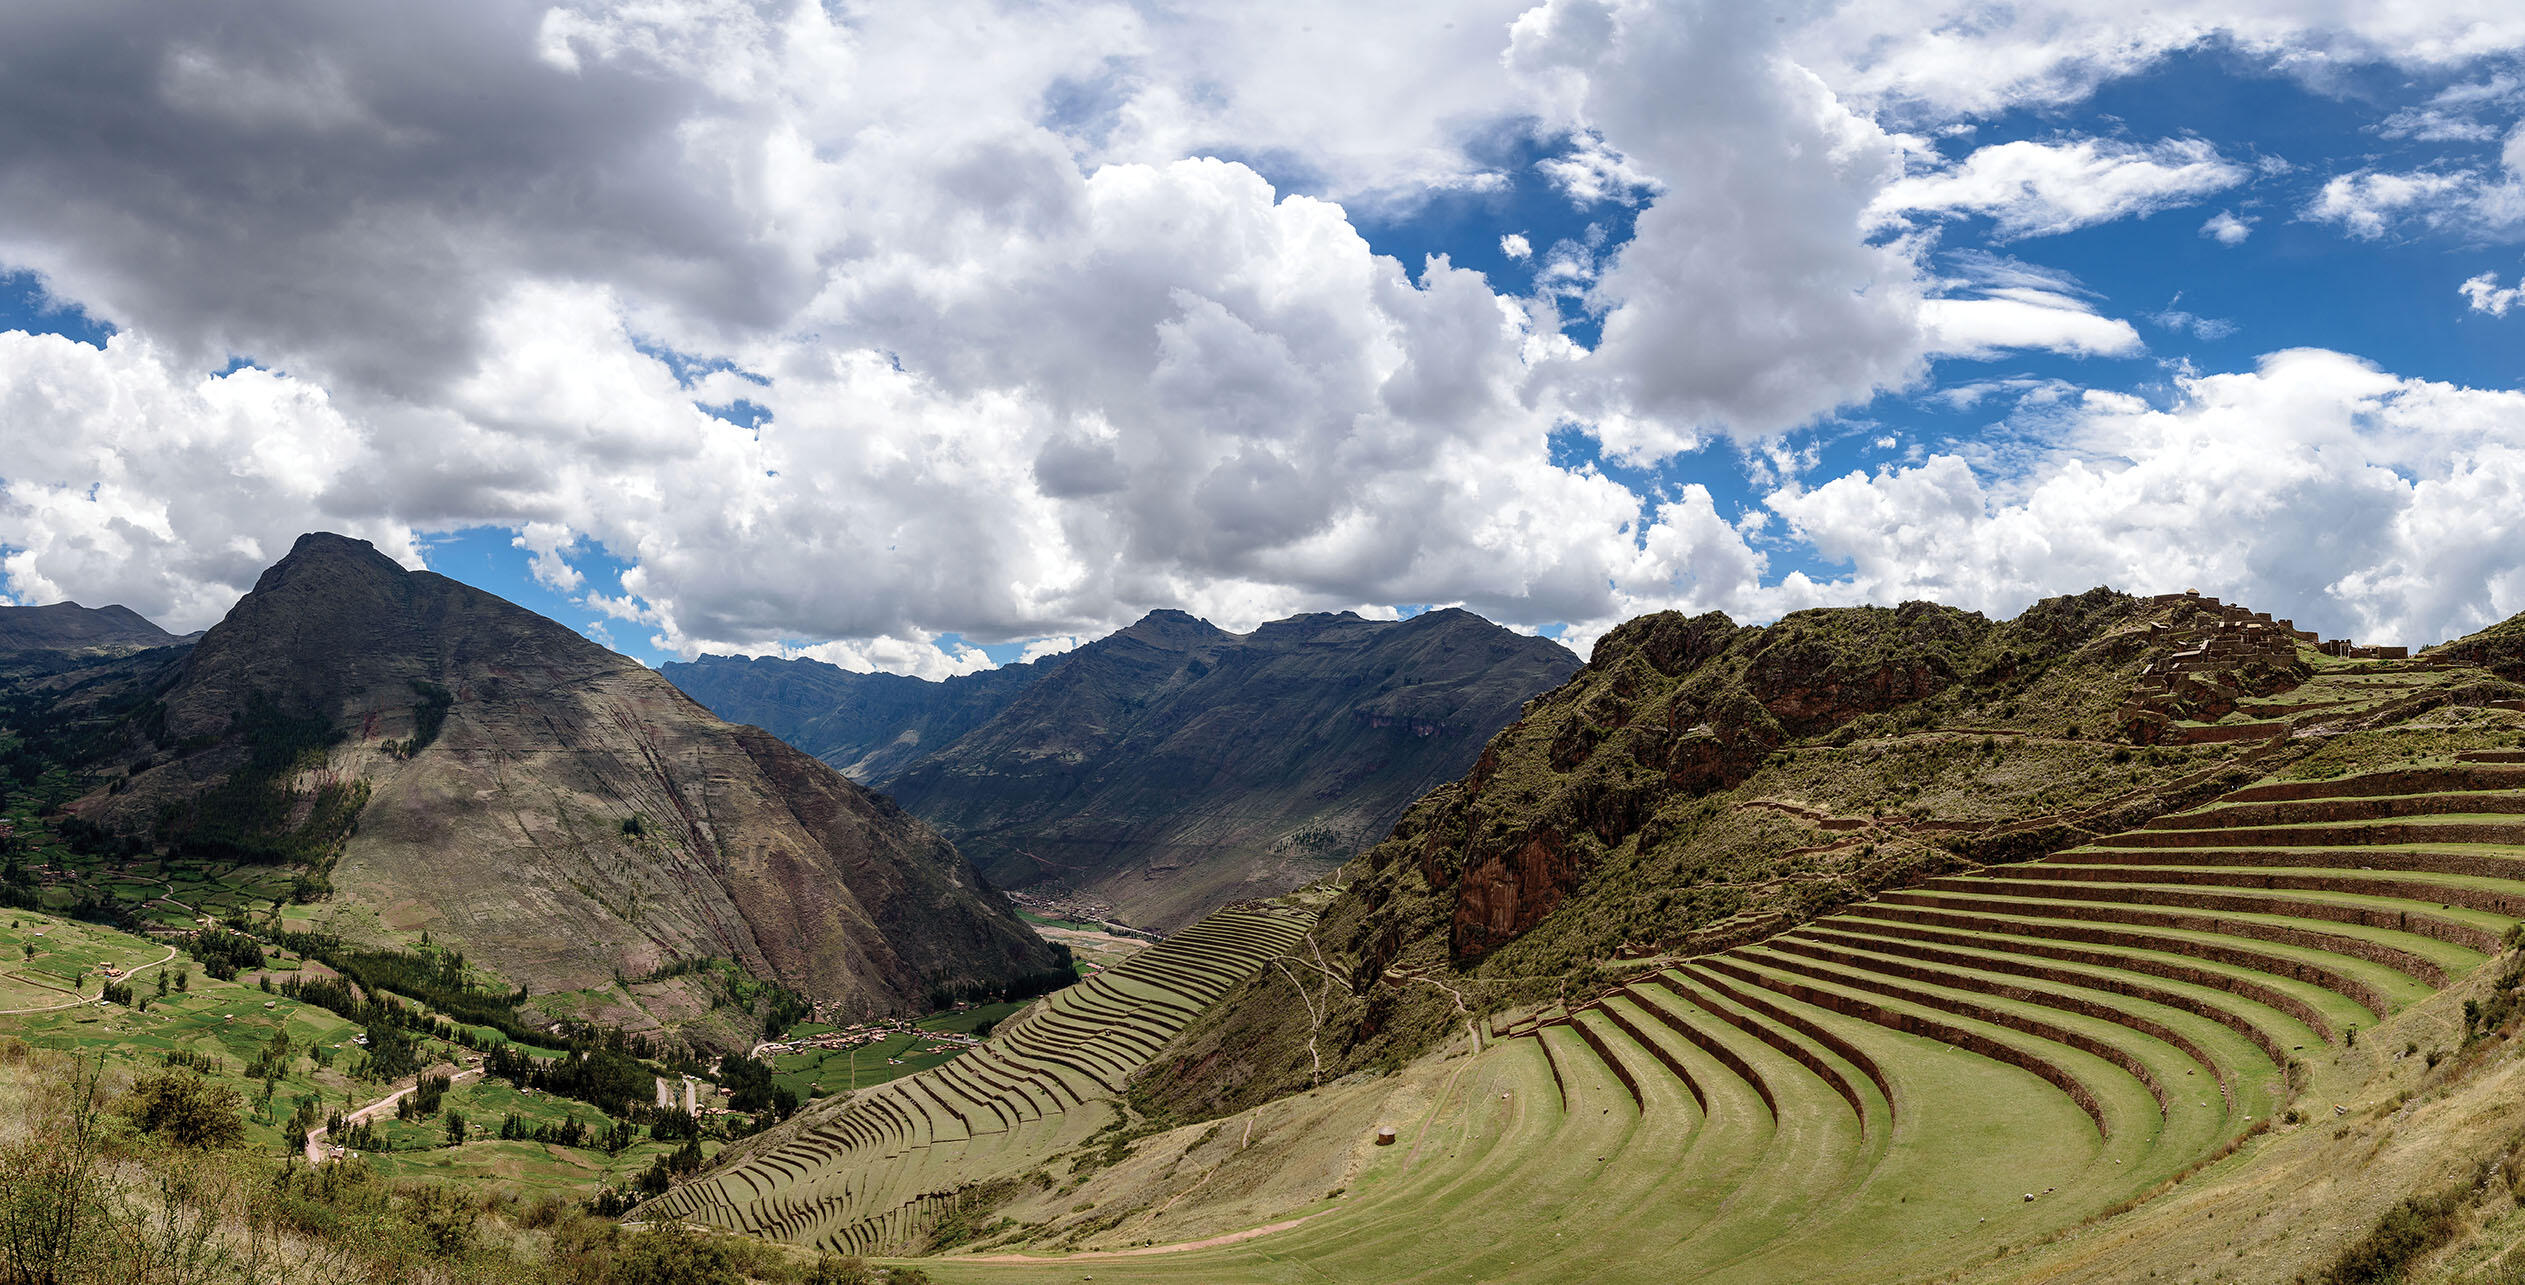 Aerial photo of terrace works in Pisac, Peru, which turned mountainsides into arable farmland. (Photo by MudflapDC.)